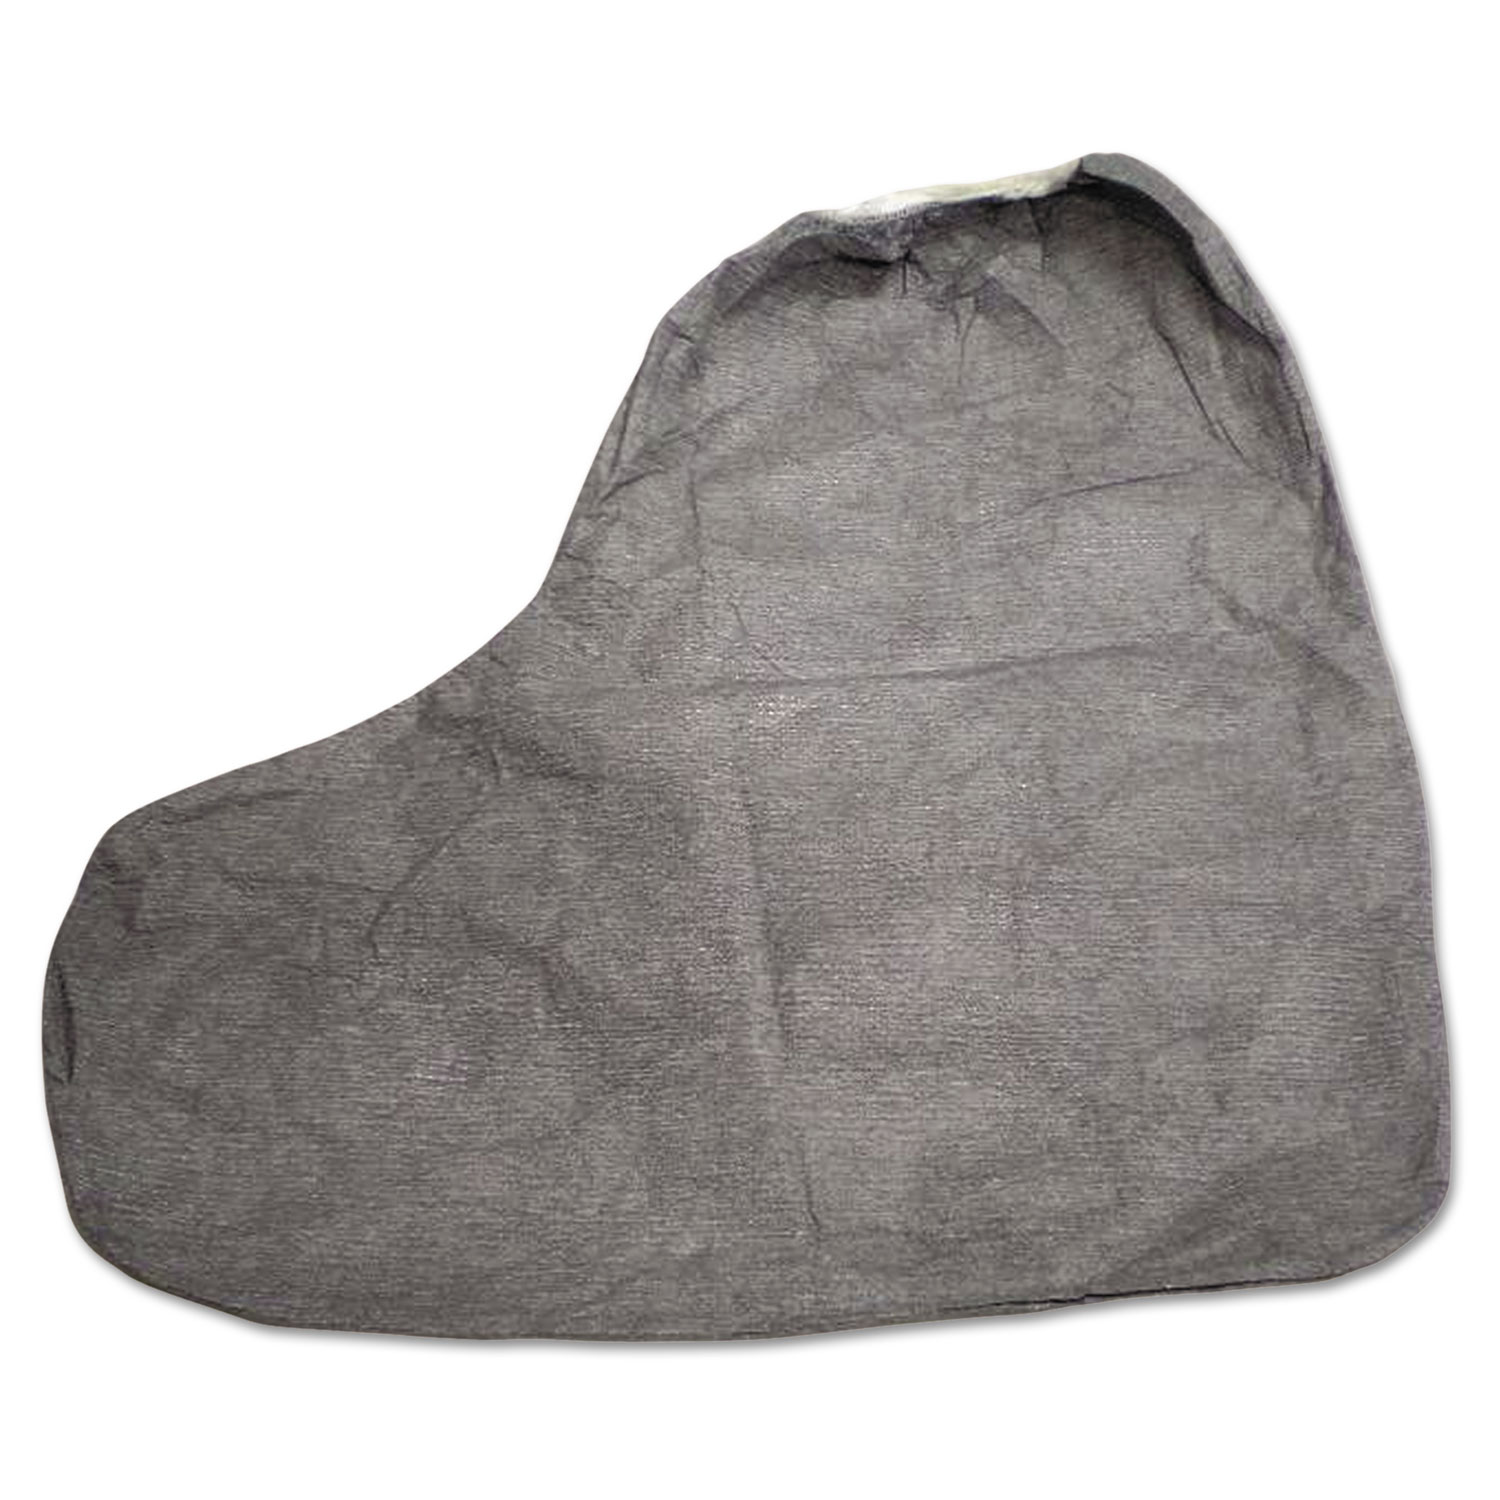 Tyvek FC Boot Cover, 16 in., One Size Fits Most, Gray, 100/Carton